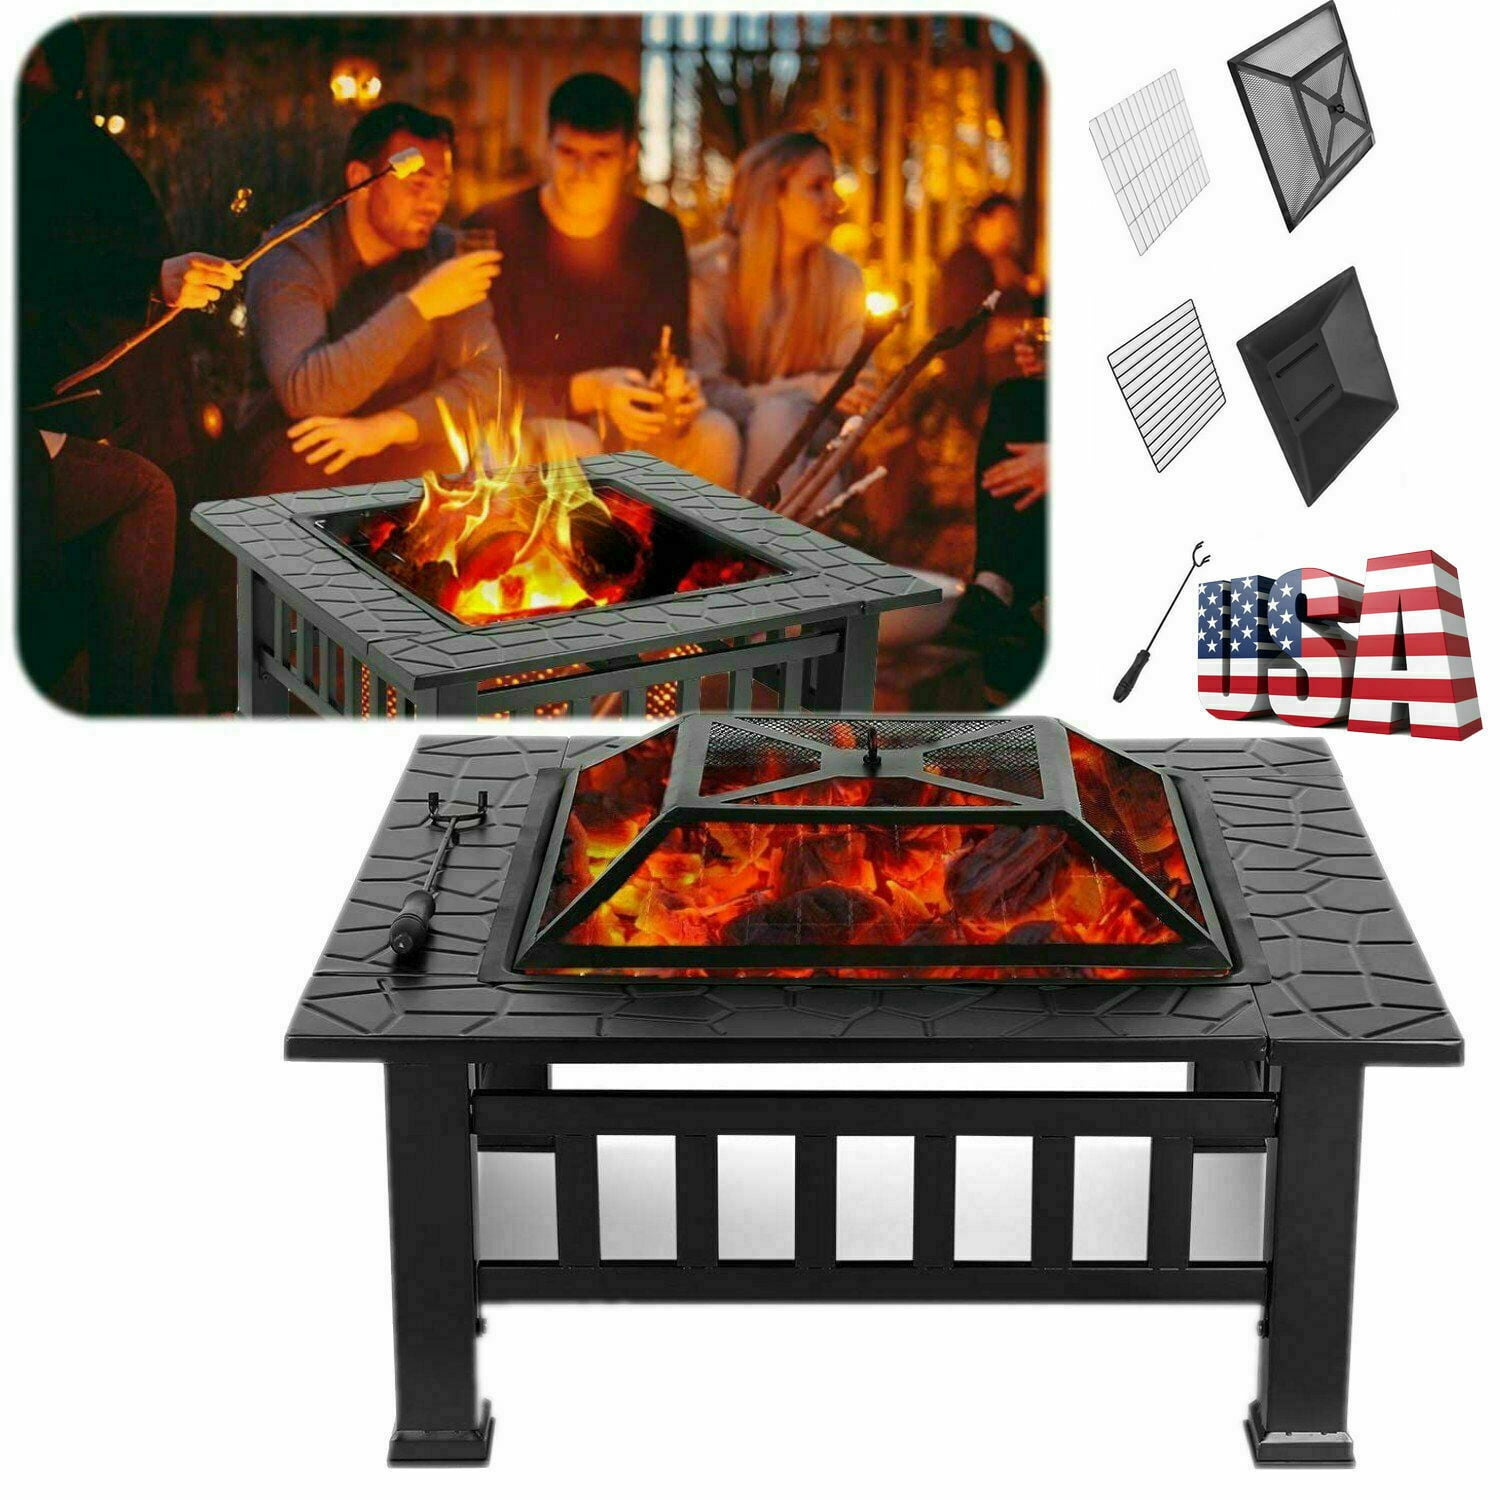 Fire Pit Table Outdoor Garden Terrace Fire Bowl Heater/BBQ/Ice Pit Fireplace 32" 